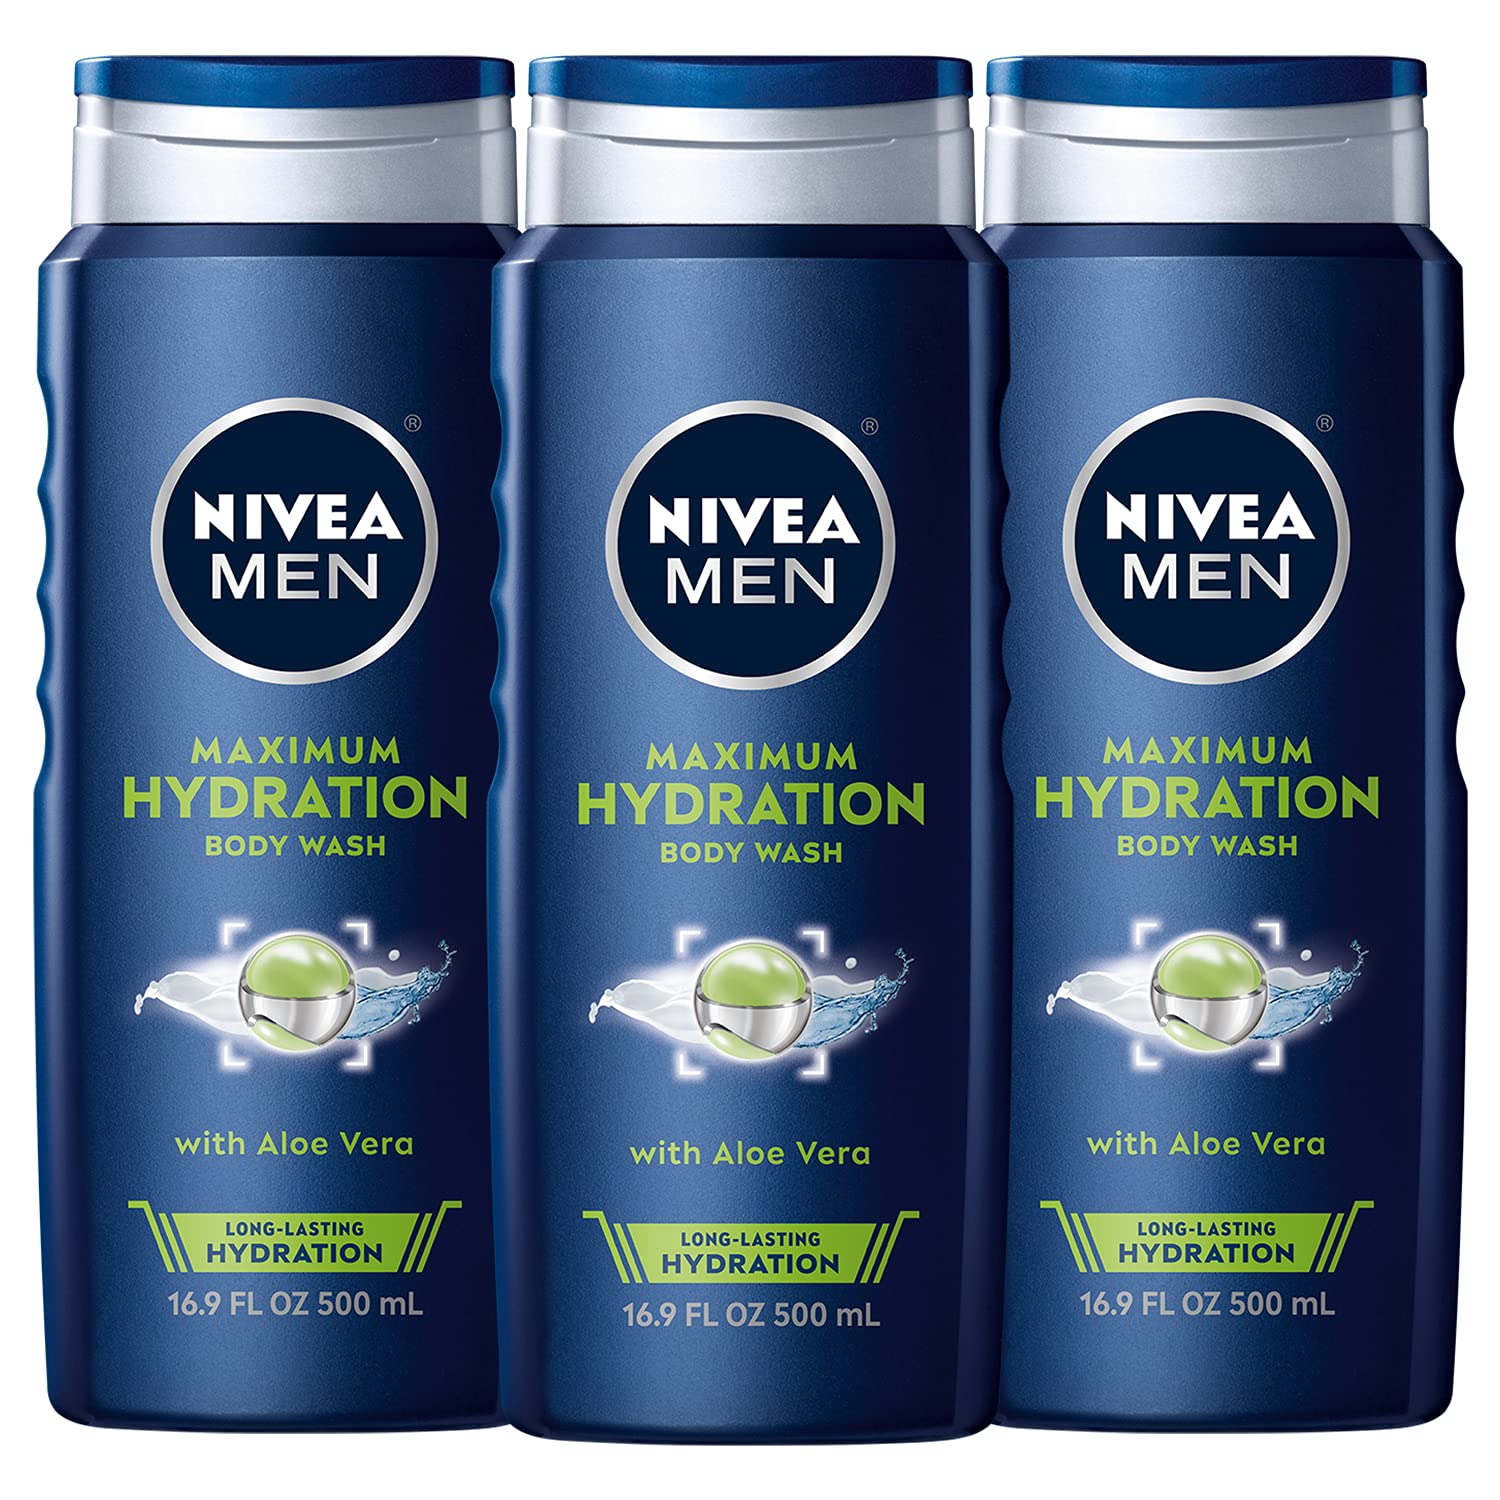 3-Pack 16.9-Oz NIVEA MEN Body Wash (Maximum Hydration) $10.00 w/ S&S + Free Shipping w/ Prime or on $35+